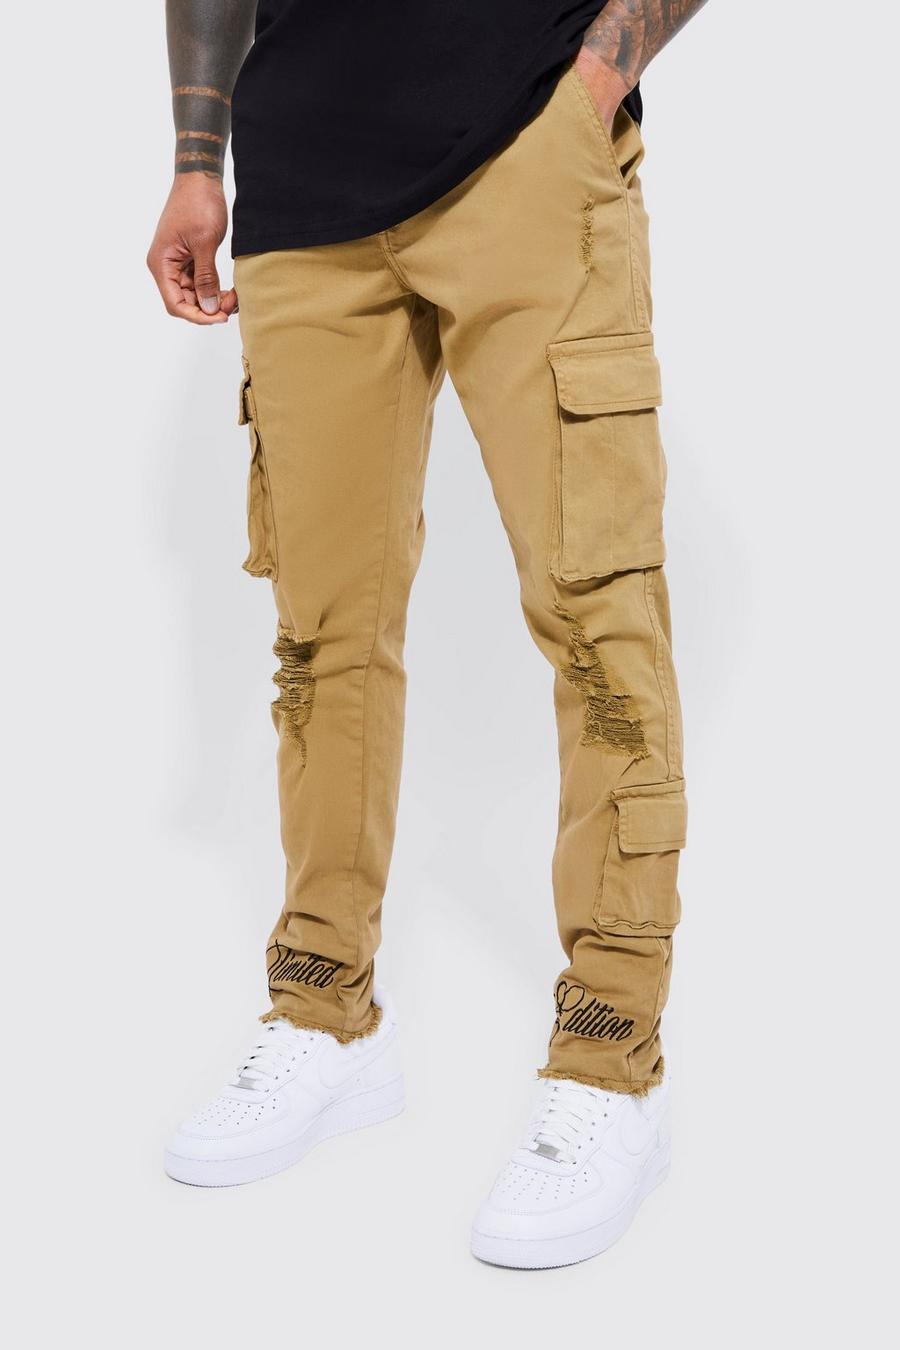 Tan marrone Fixed Waist Skinny Rip And Embroidered Cargo Pants